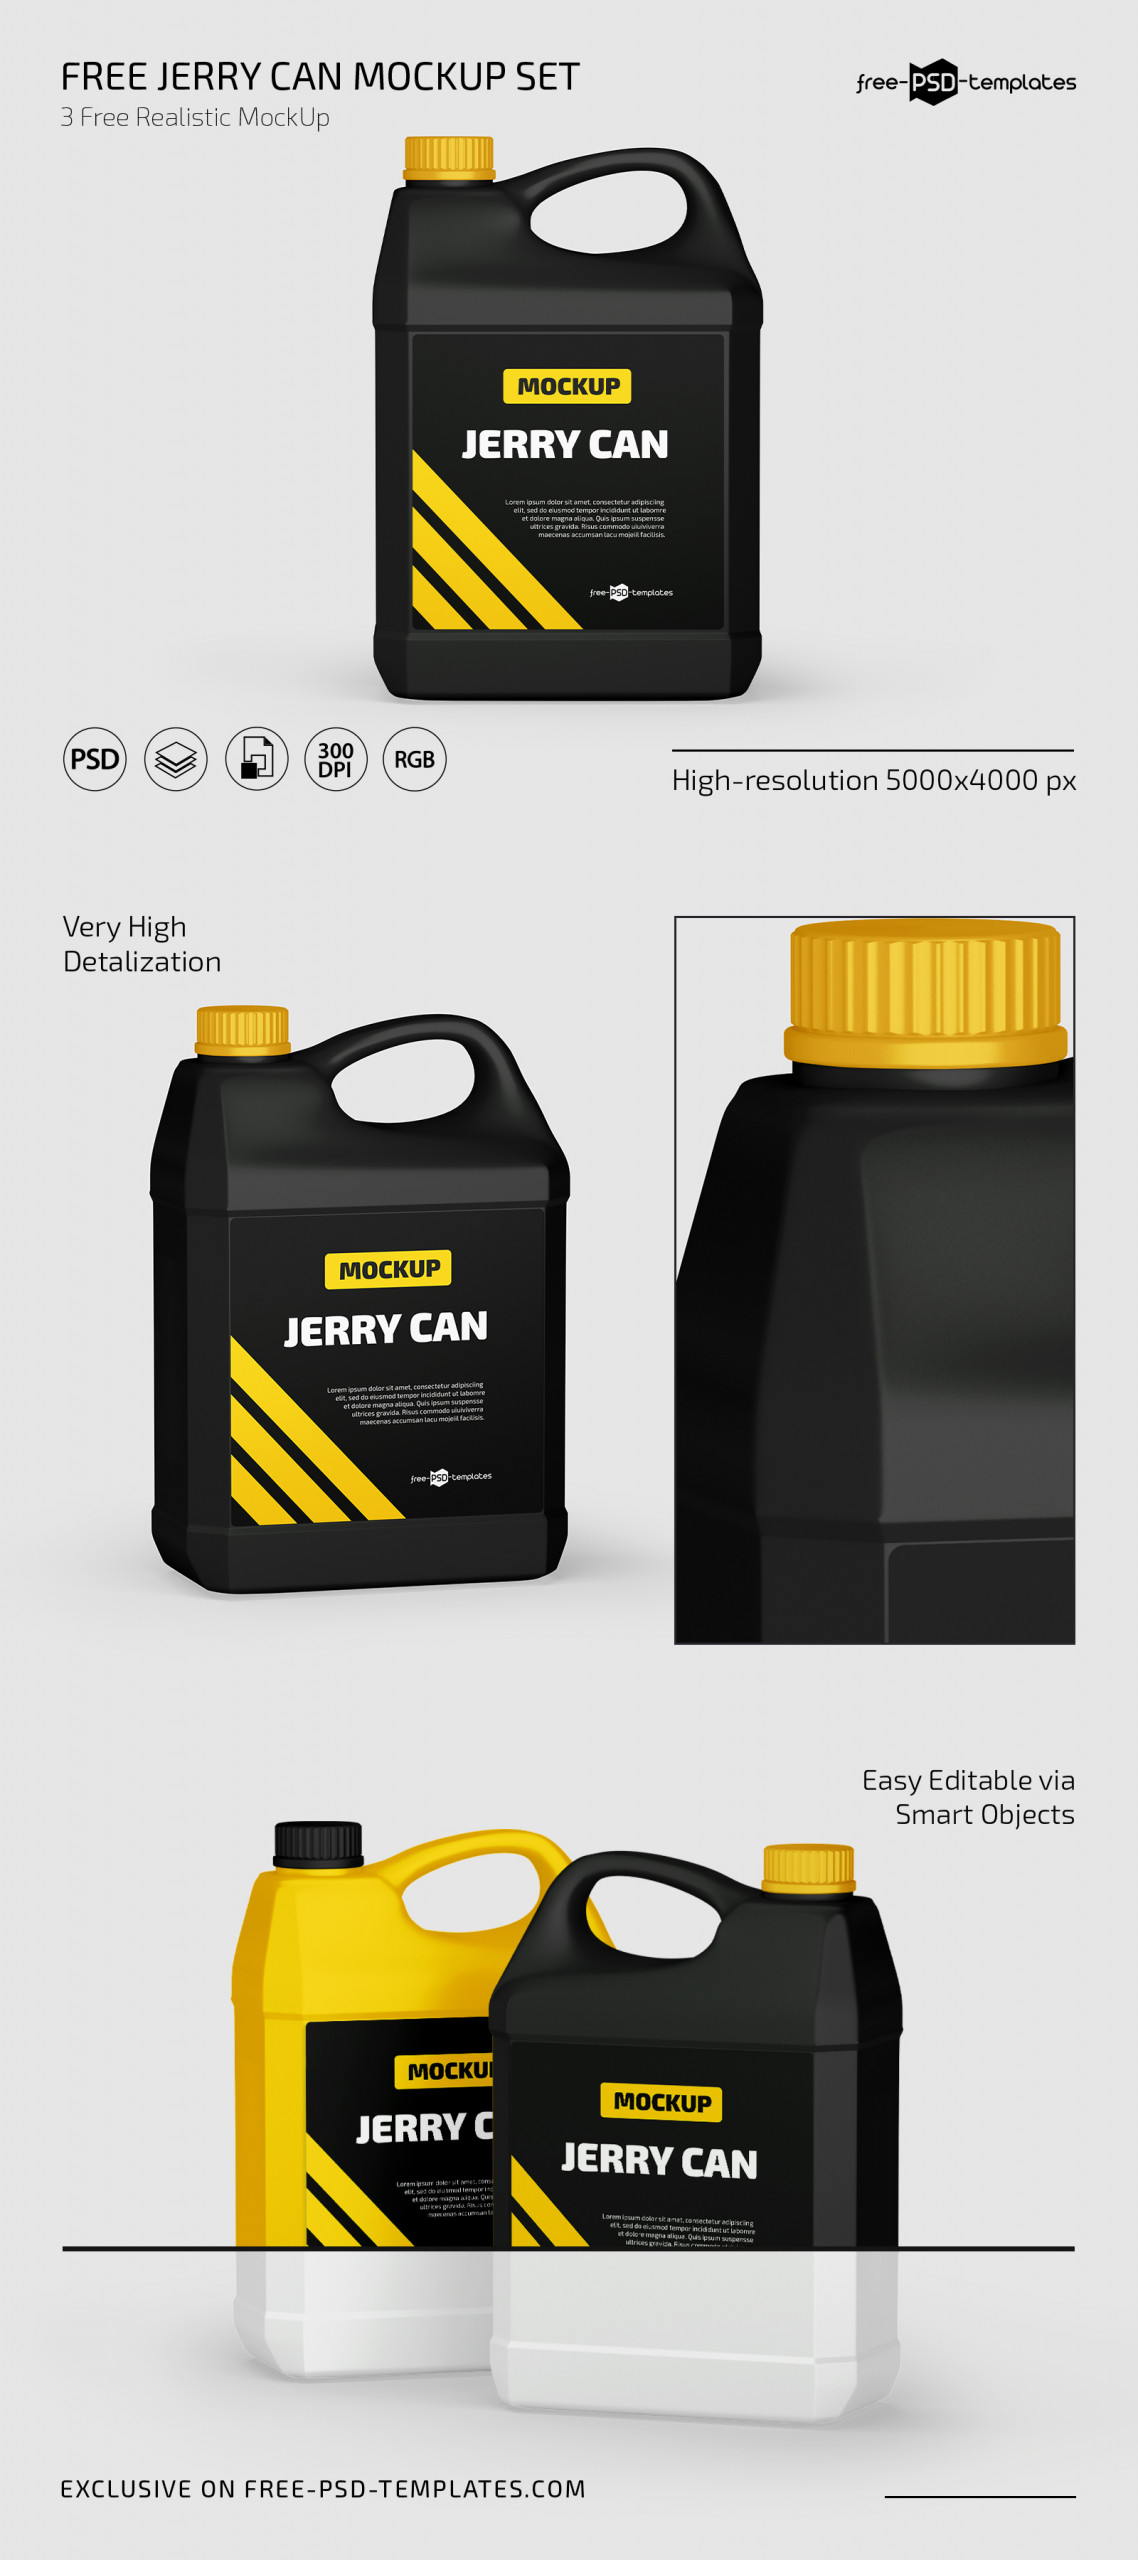 Web Pv Free Jerry Can Mockups scaled